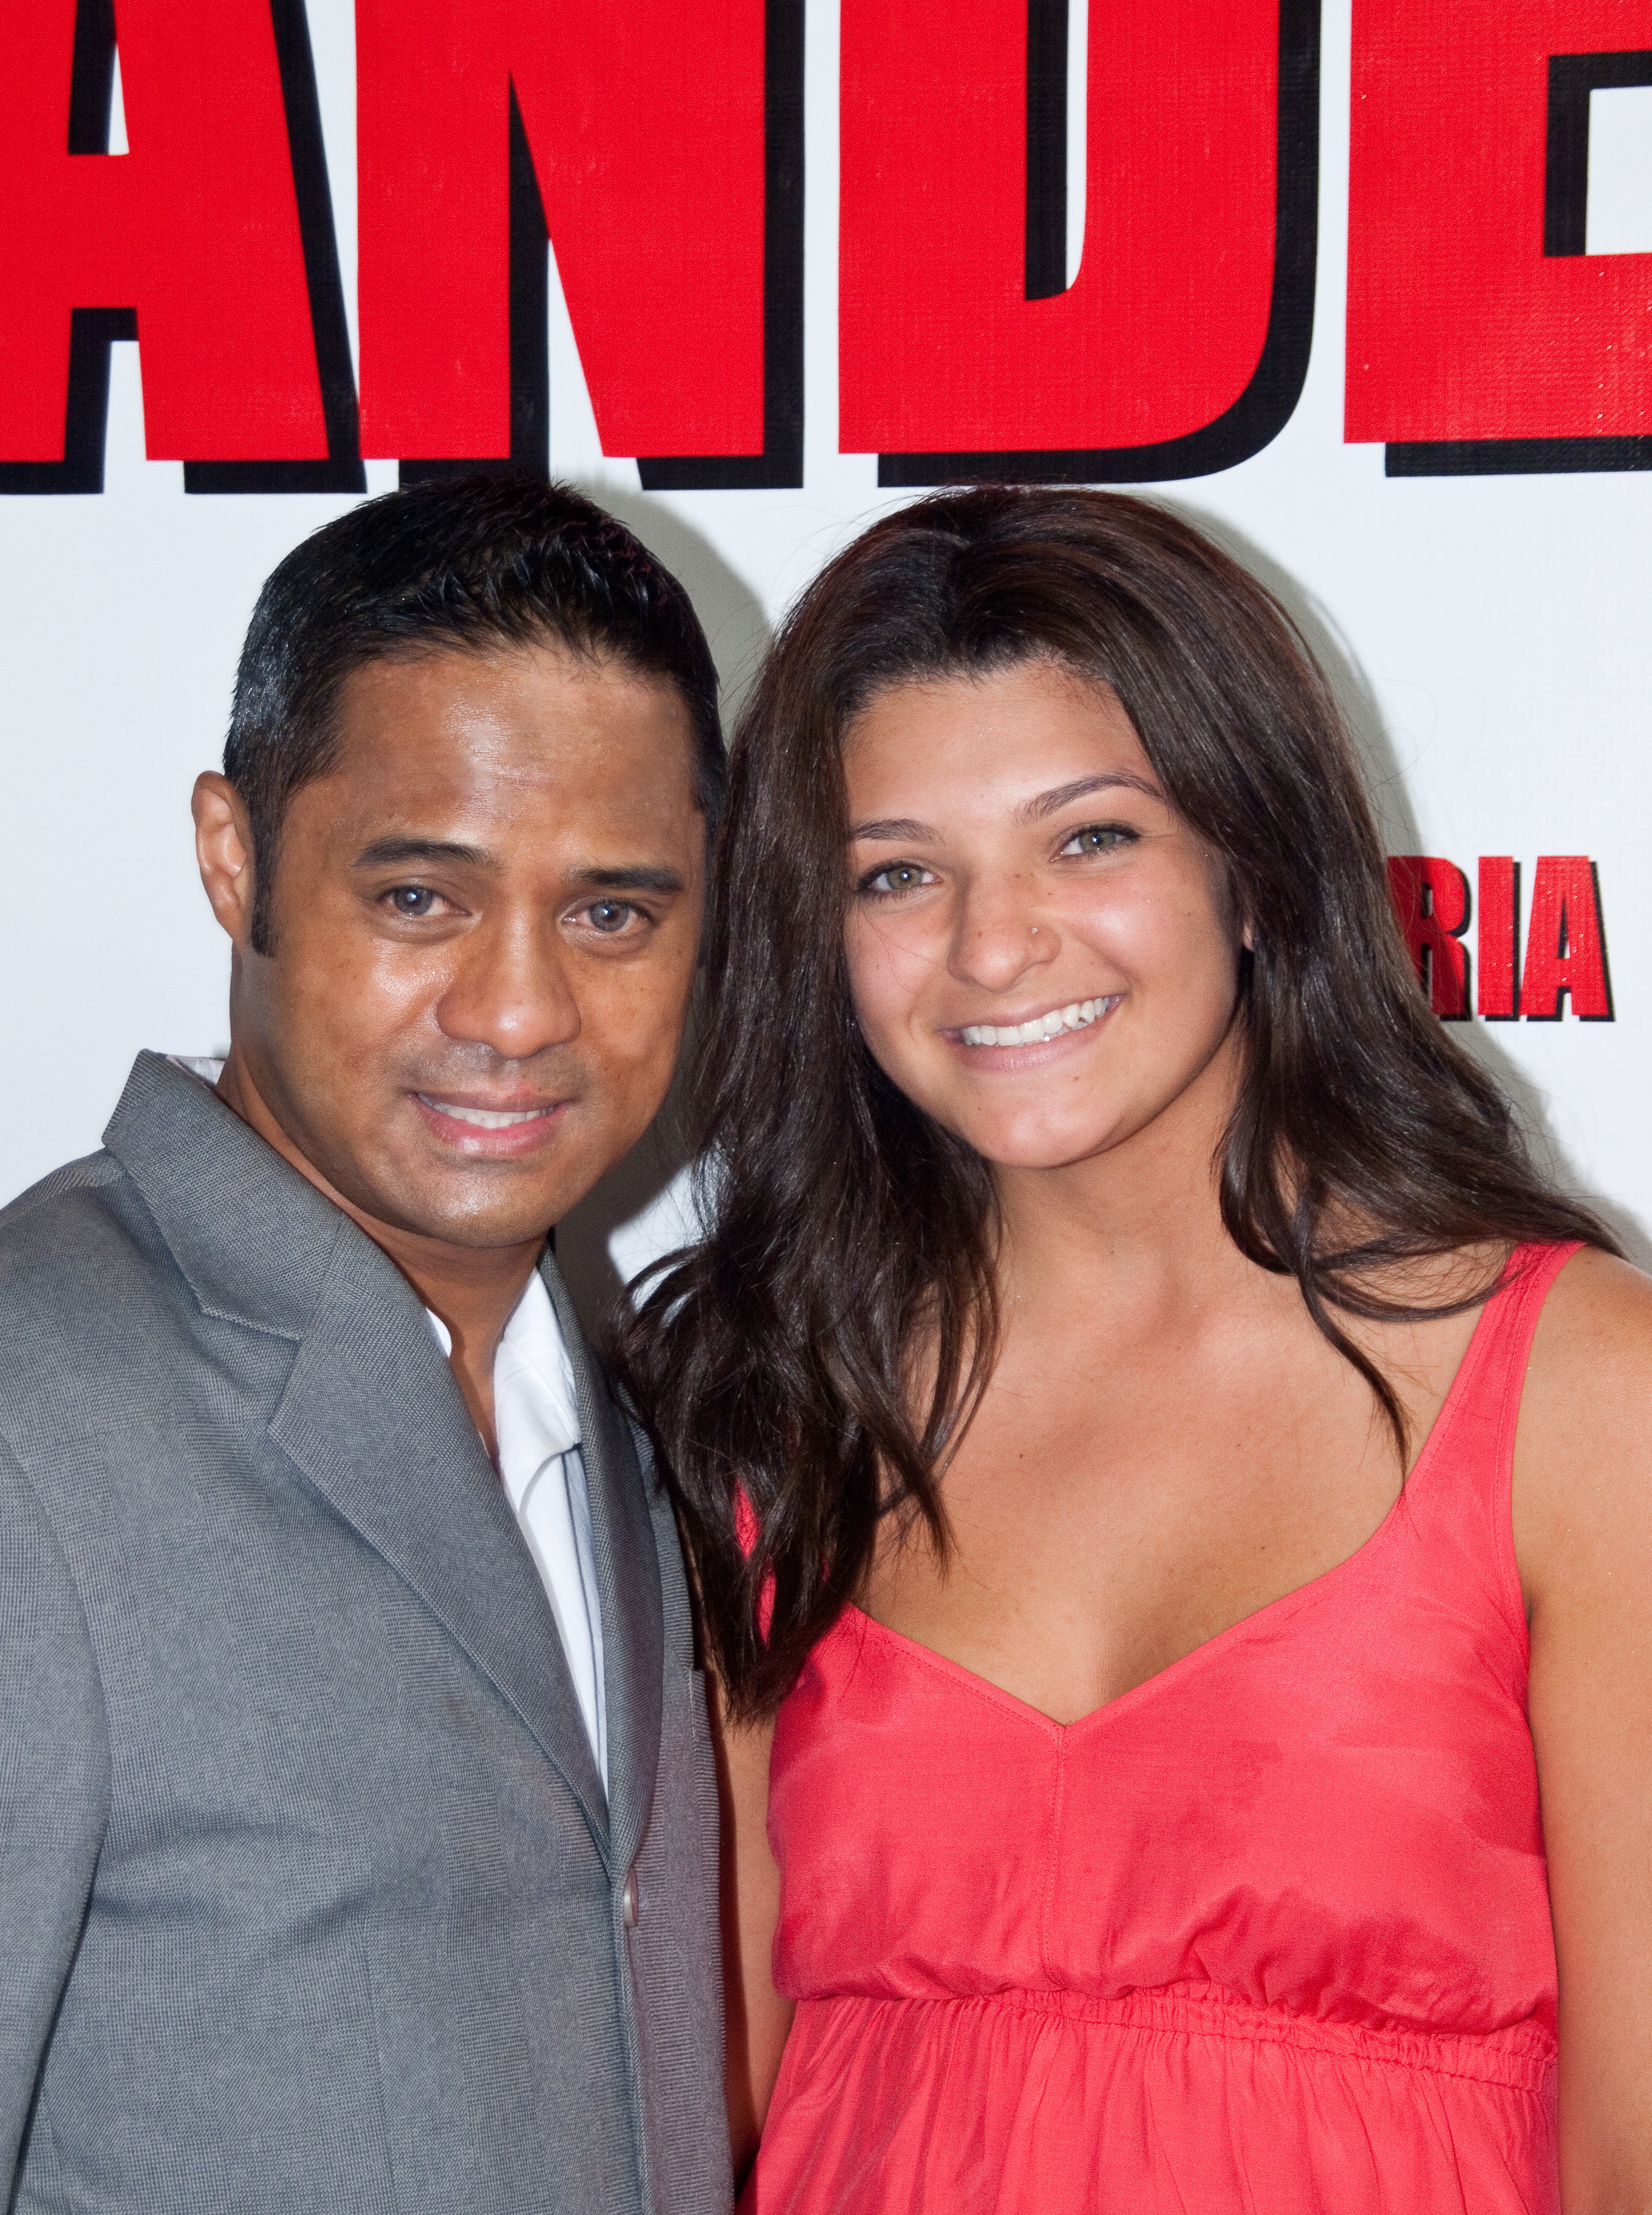 Tyrone Tann and Delanie Armstrong attending World Premiere of Lavanderia.